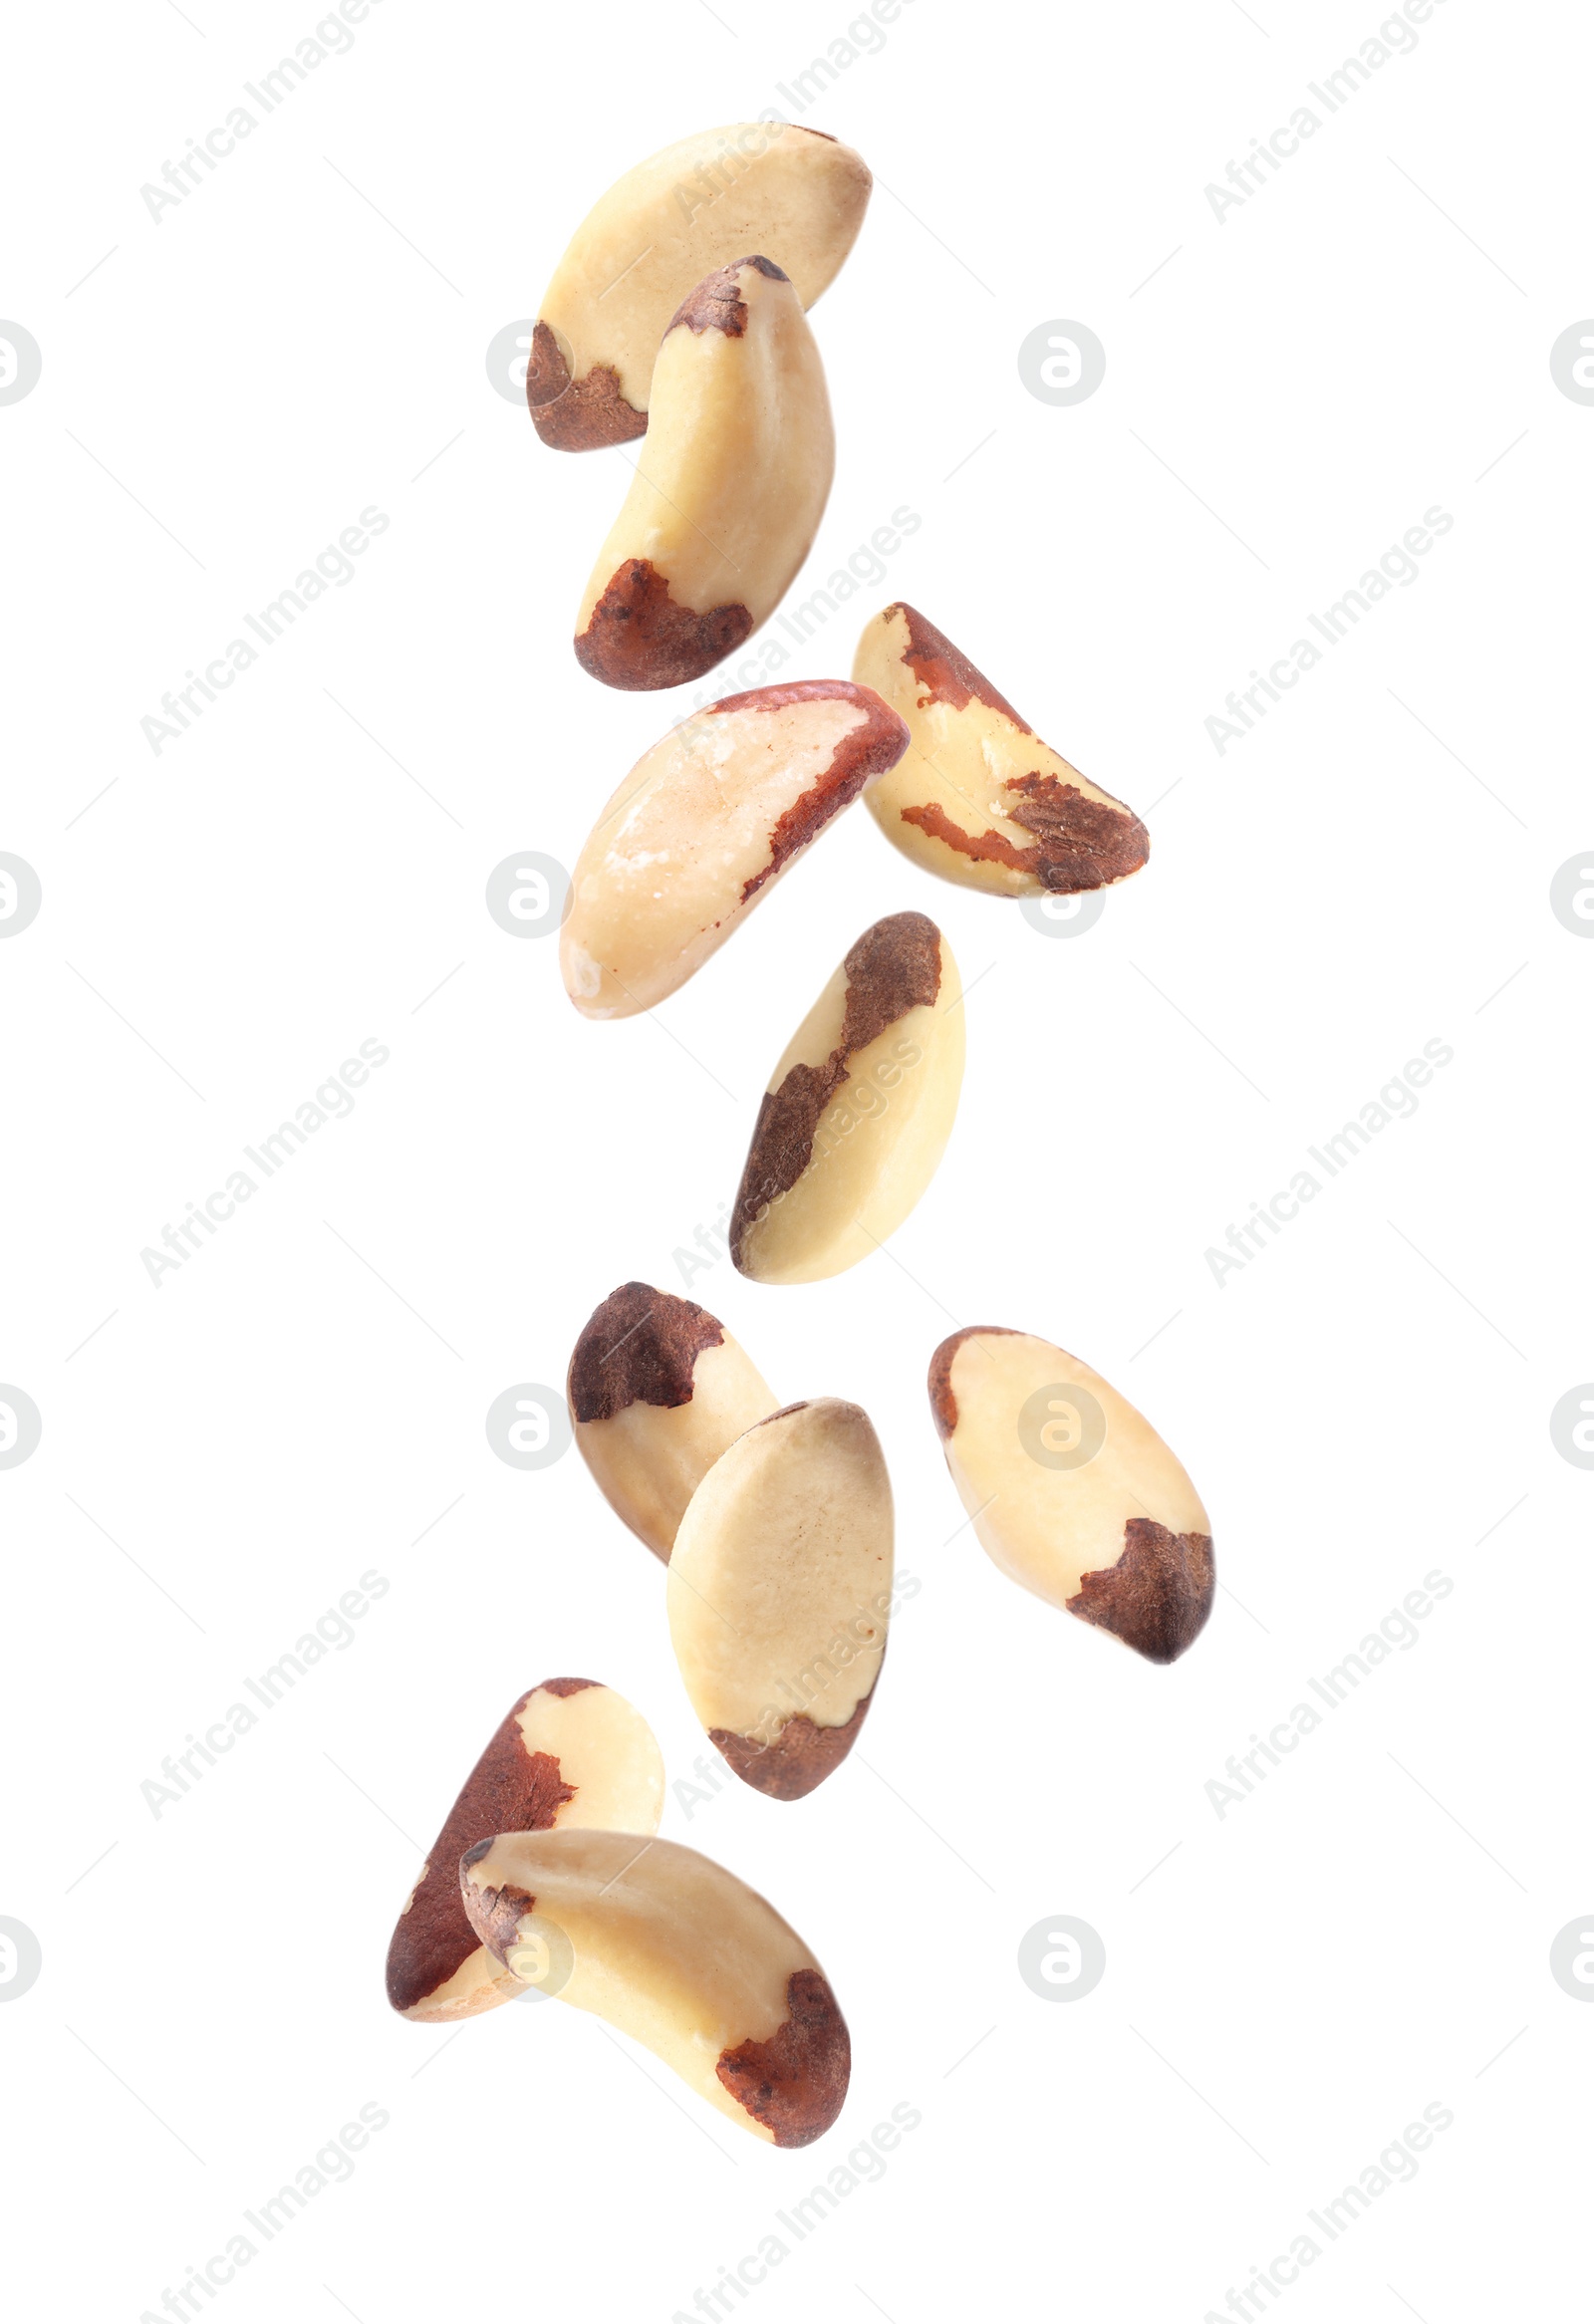 Image of Delicious Brazil nuts falling on white background 